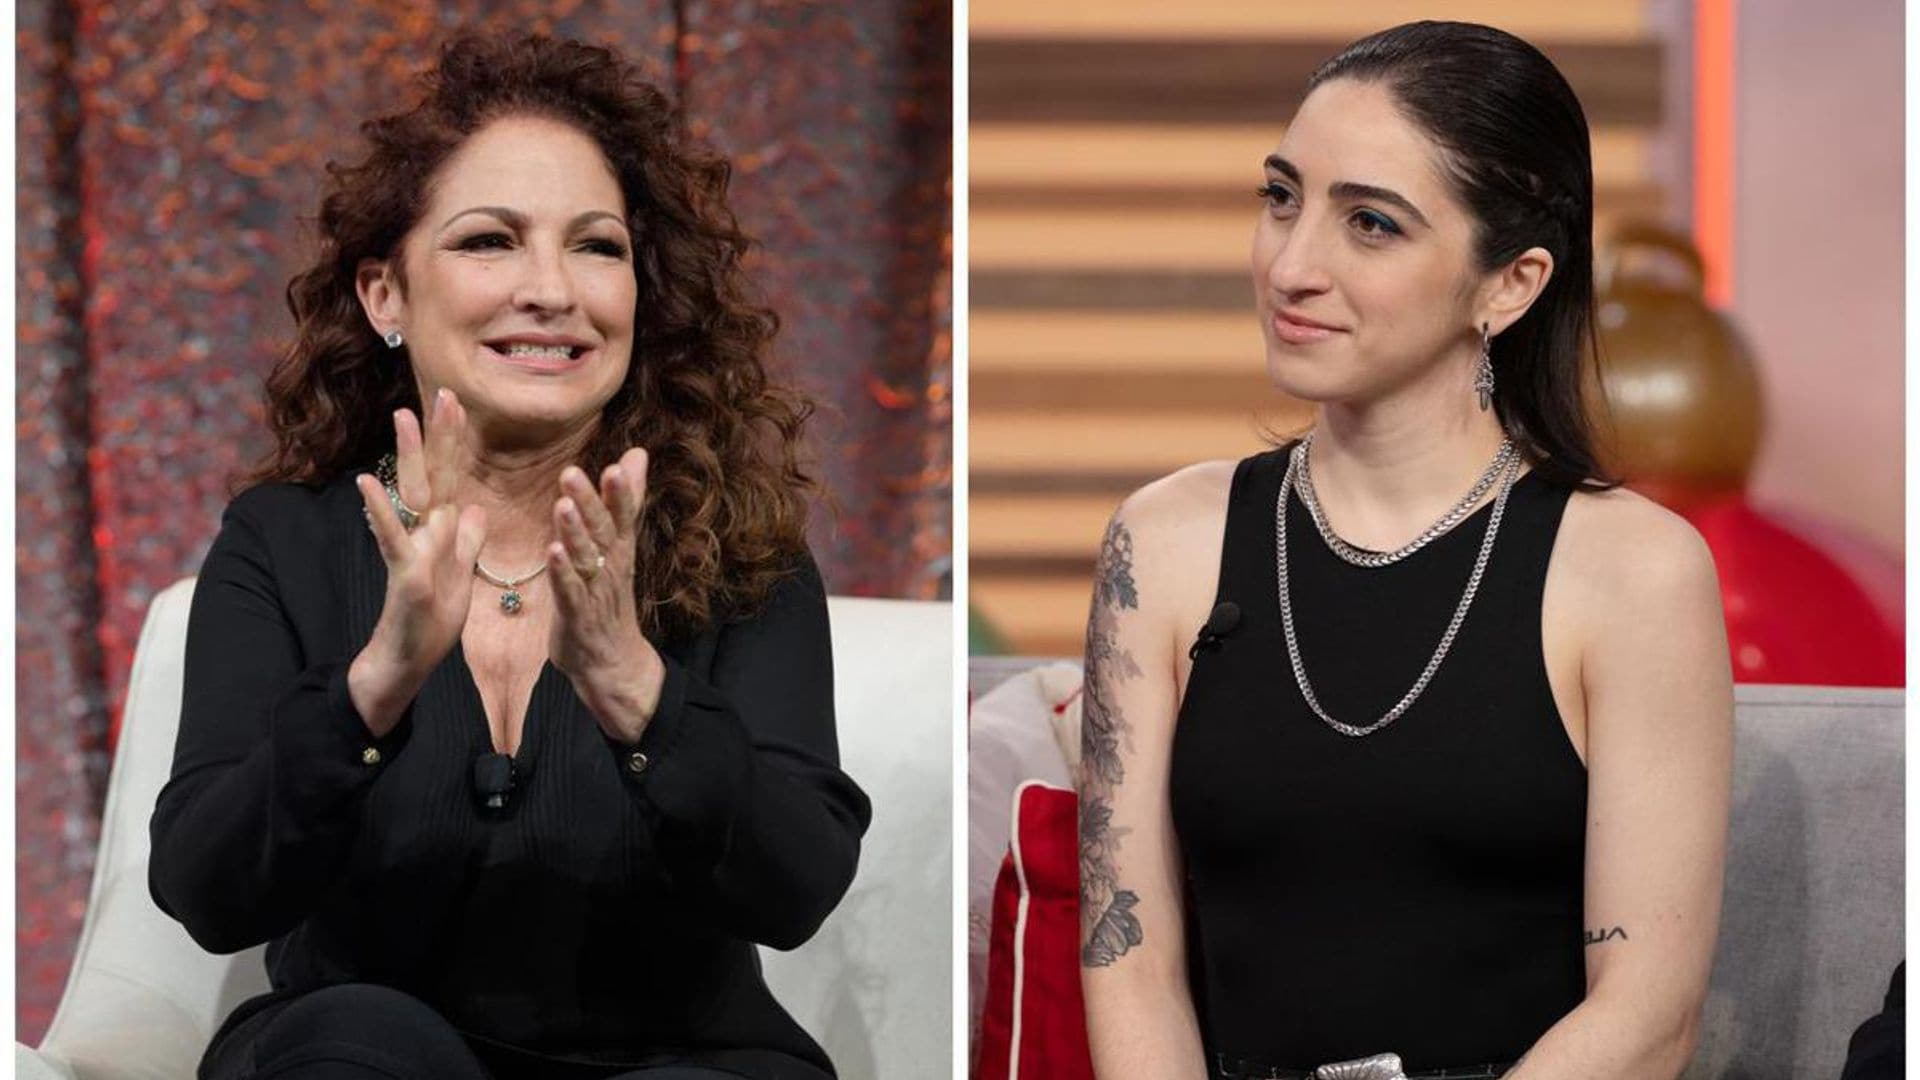 Gloria Estefan pens a beautiful tribute to her daughter, Emily Estefan, for her 28th birthday